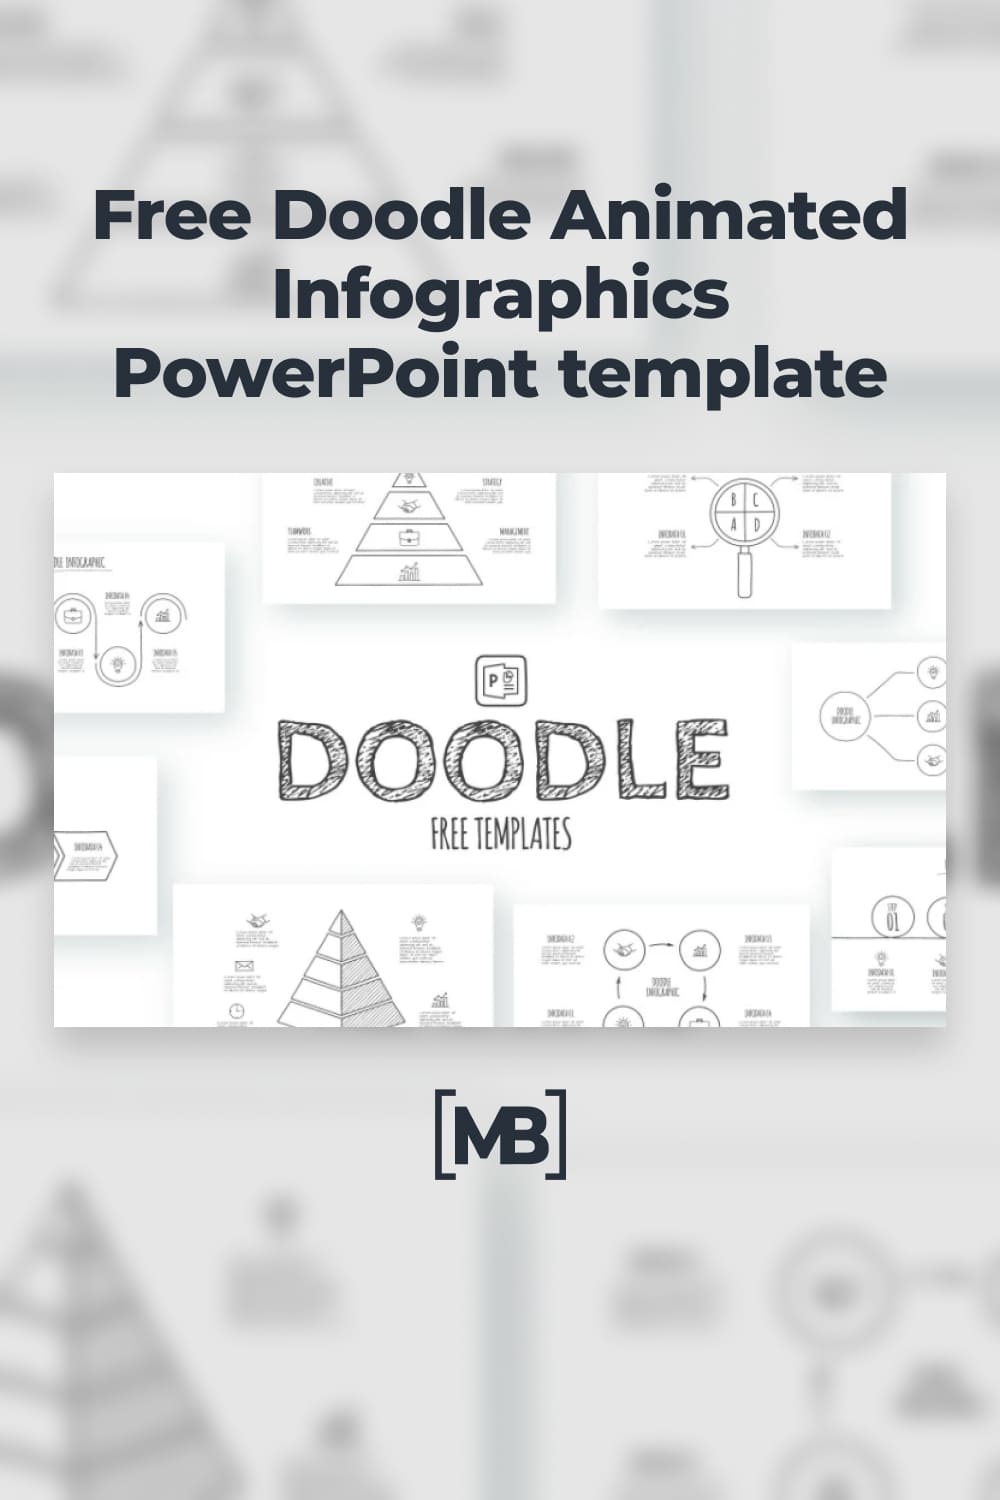 Free doodle animated infographics powerpoint template.